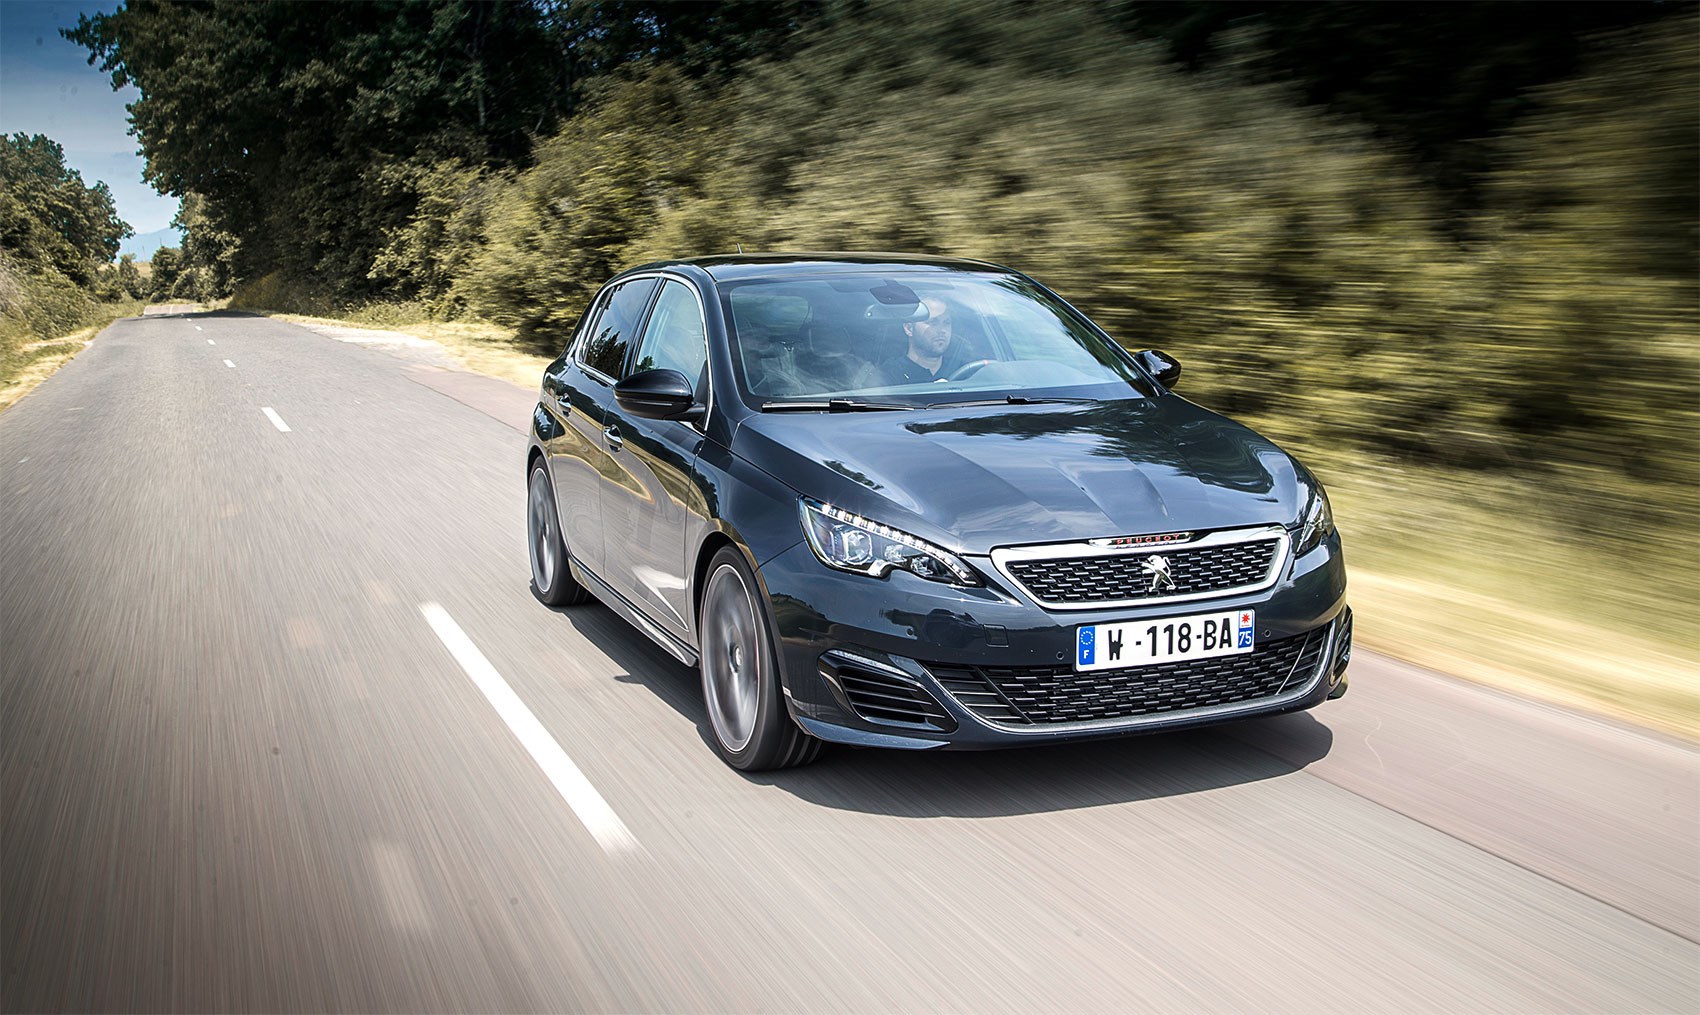 A week with a Peugeot 308 GTi